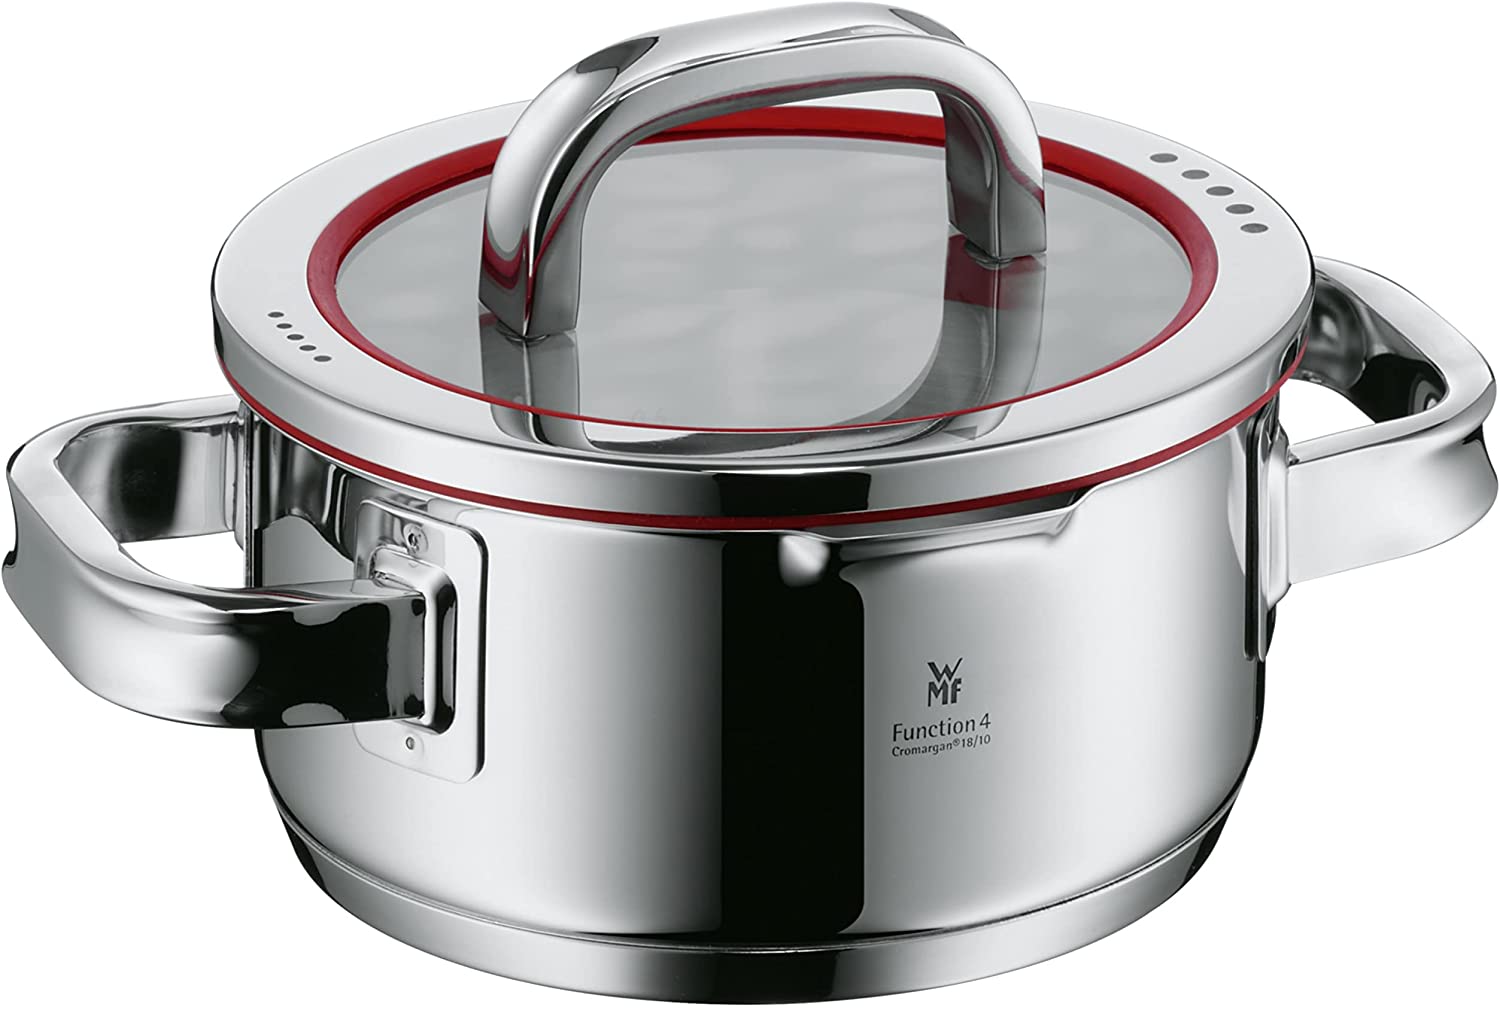 WMF cookware Ø 16 cm approx. 1,4l Function 4 Inside scaling lid - pour off or decant liquids without spilling to keep your dishes and cooker clean. Hollow side handles glass lid Cromargan stainless steel brushed suitable for all stove tops including induction dishwasher-safe